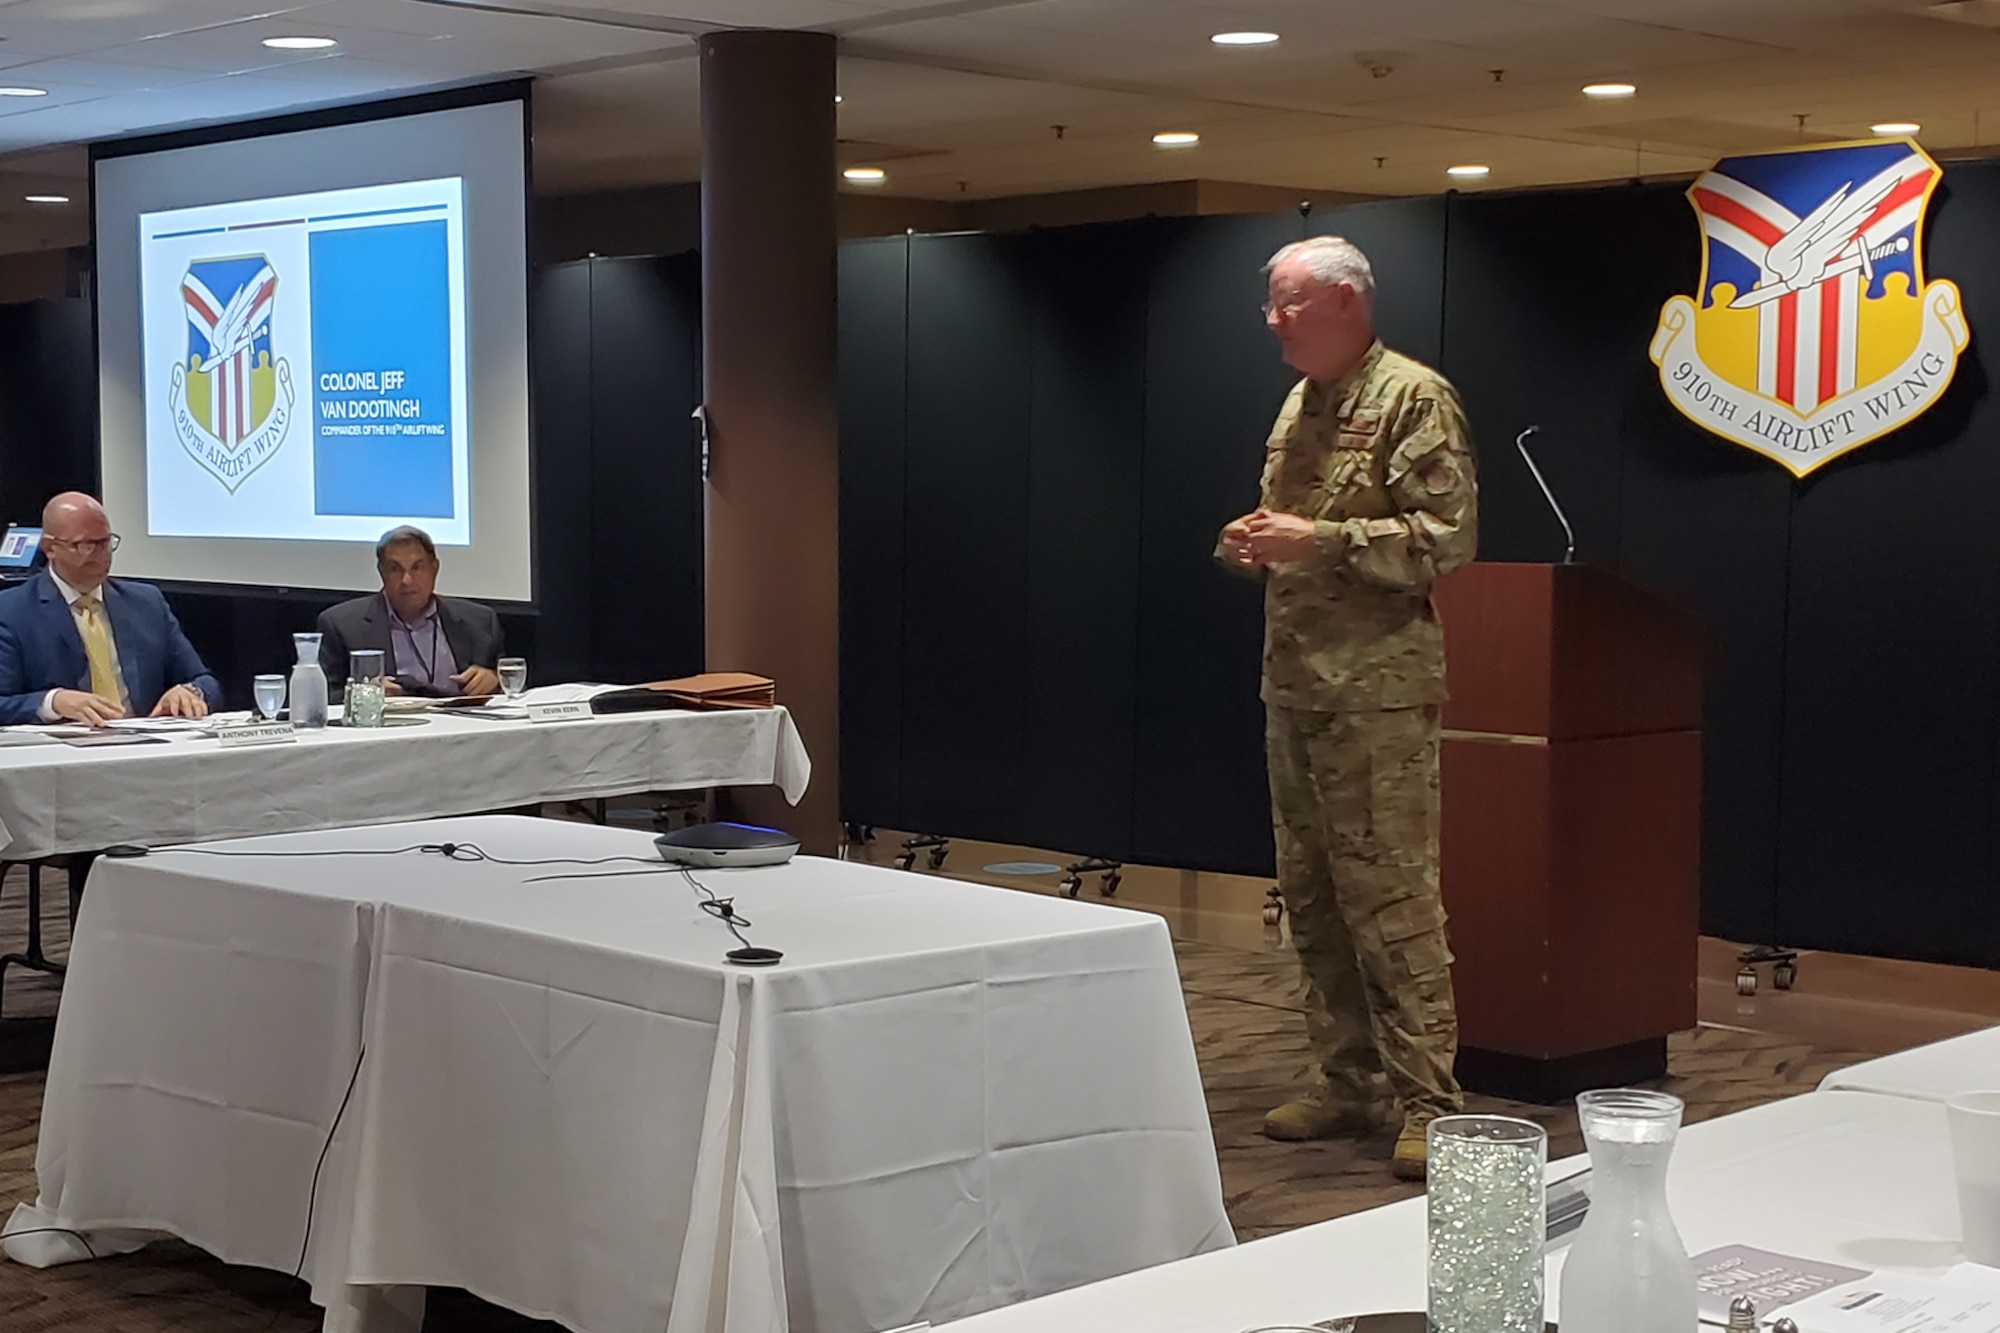 The 910th Airlift Wing welcomed the Western Reserve Port Authority’s Board of Directors to Youngstown Air Reserve Station’s Community Activity Center for their monthly meeting, July 21, 2021.